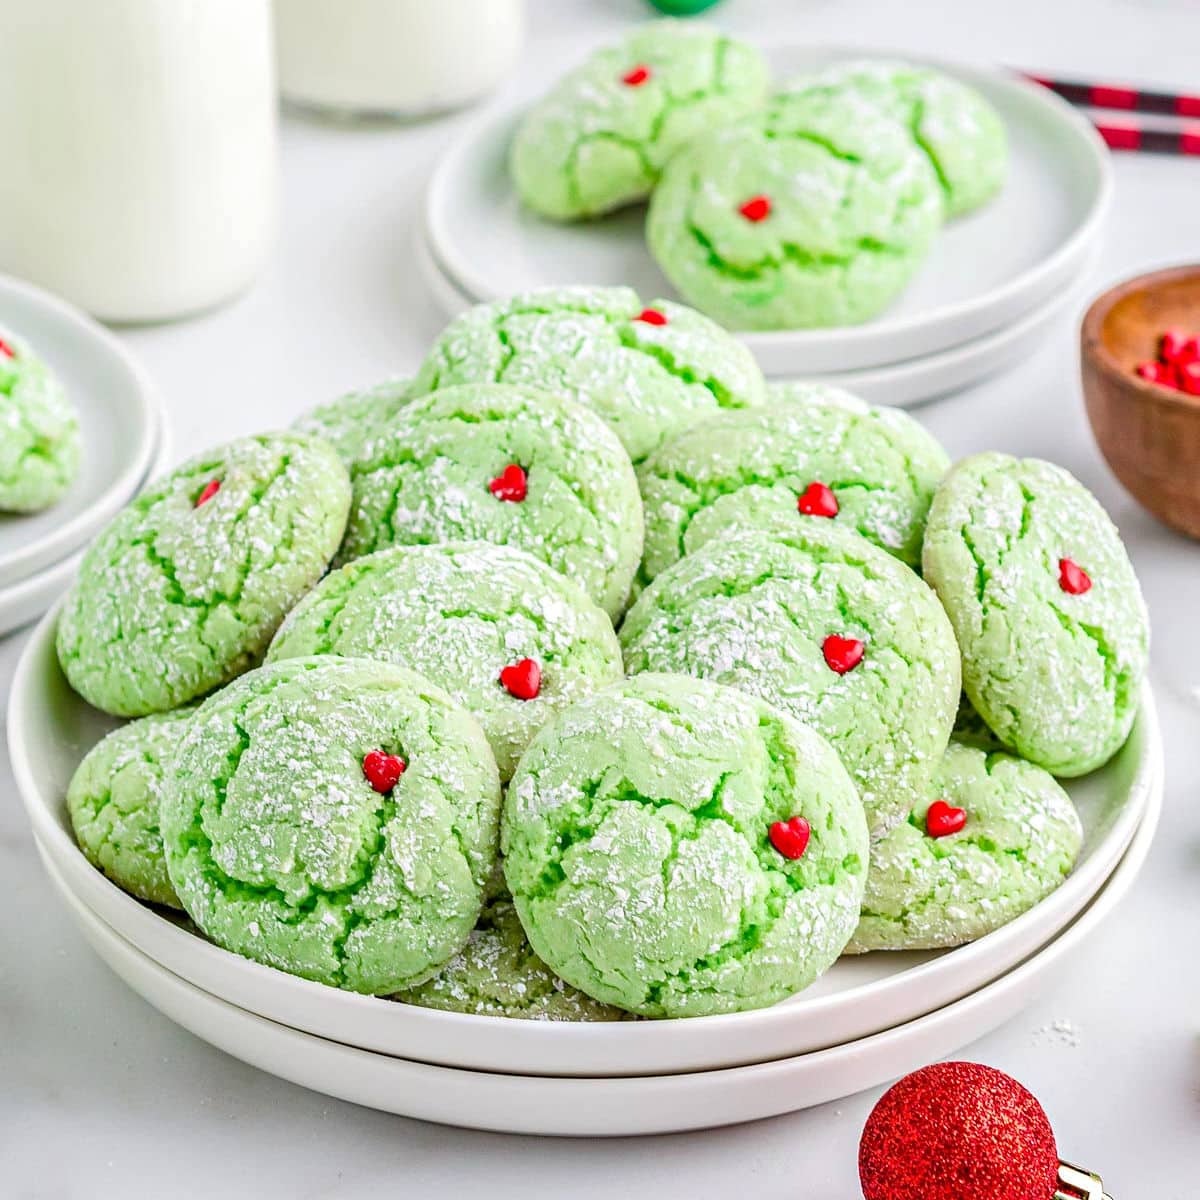 The Grinch and Max Pancakes, Christmas Recipes